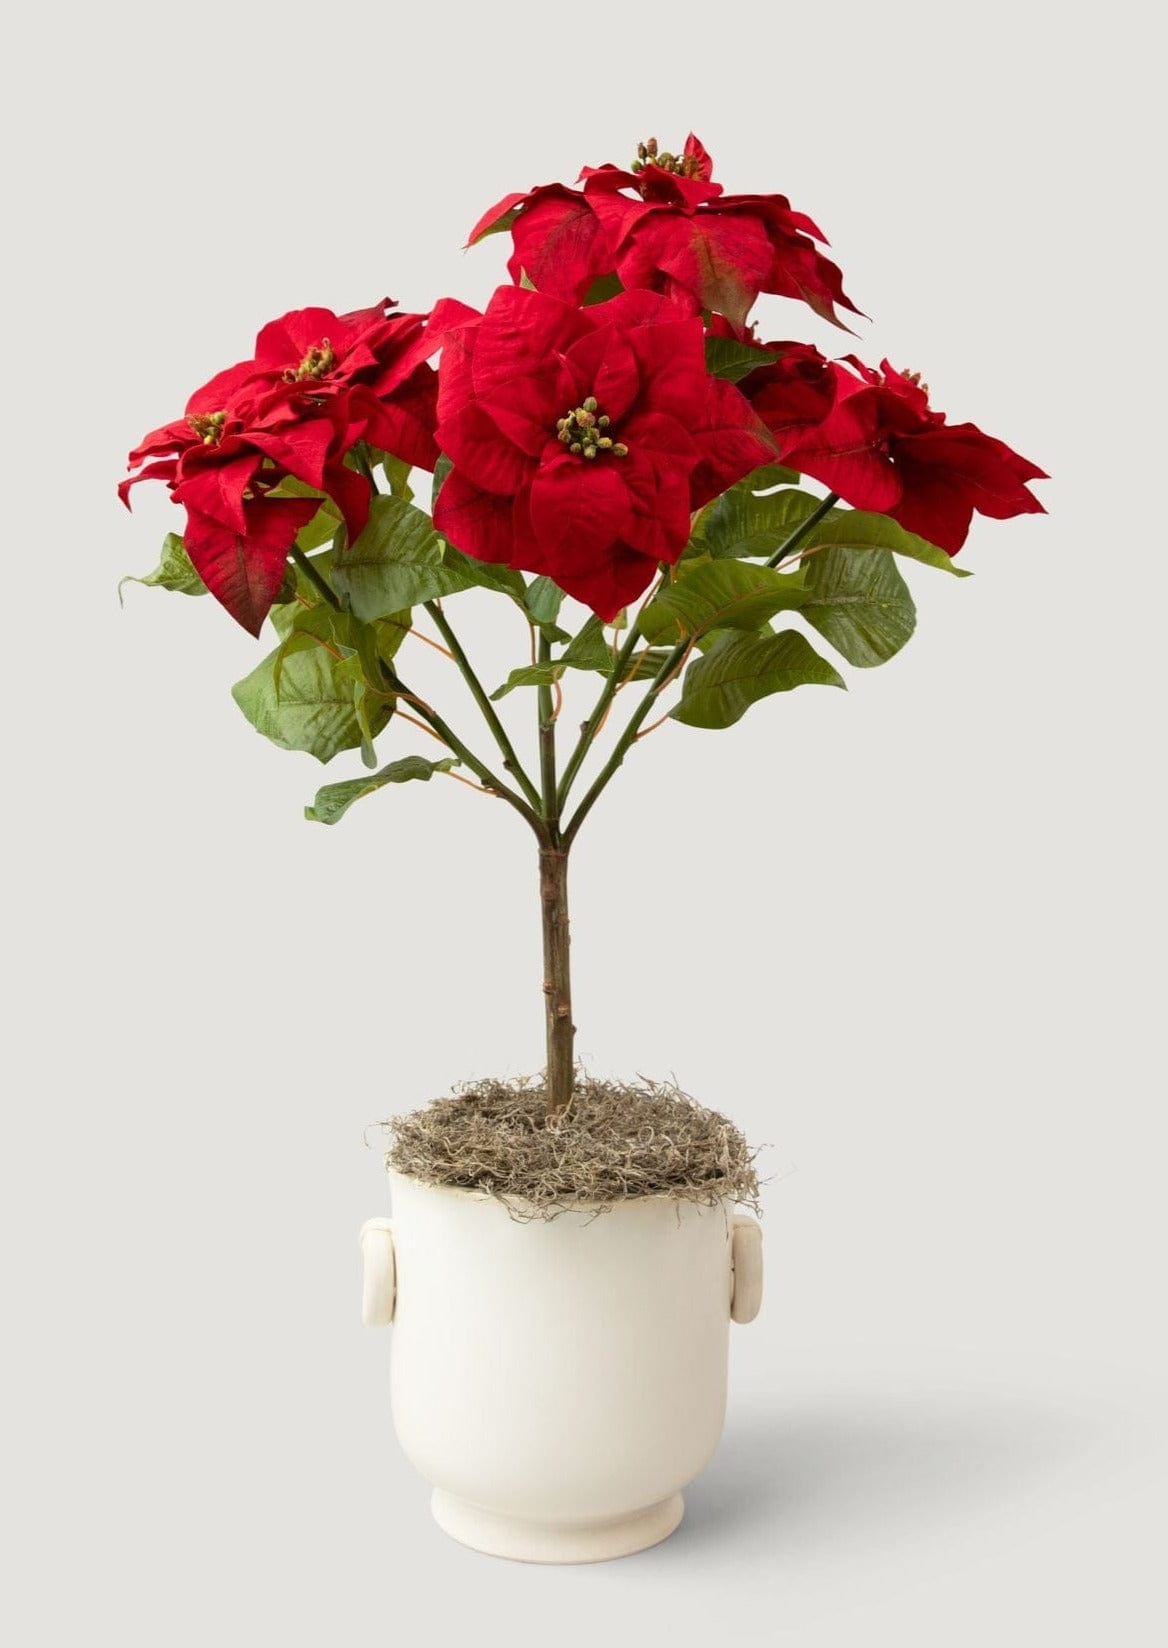 Styled Faux Red Poinsettia Plant in Ceramic Pot with Spanish Moss